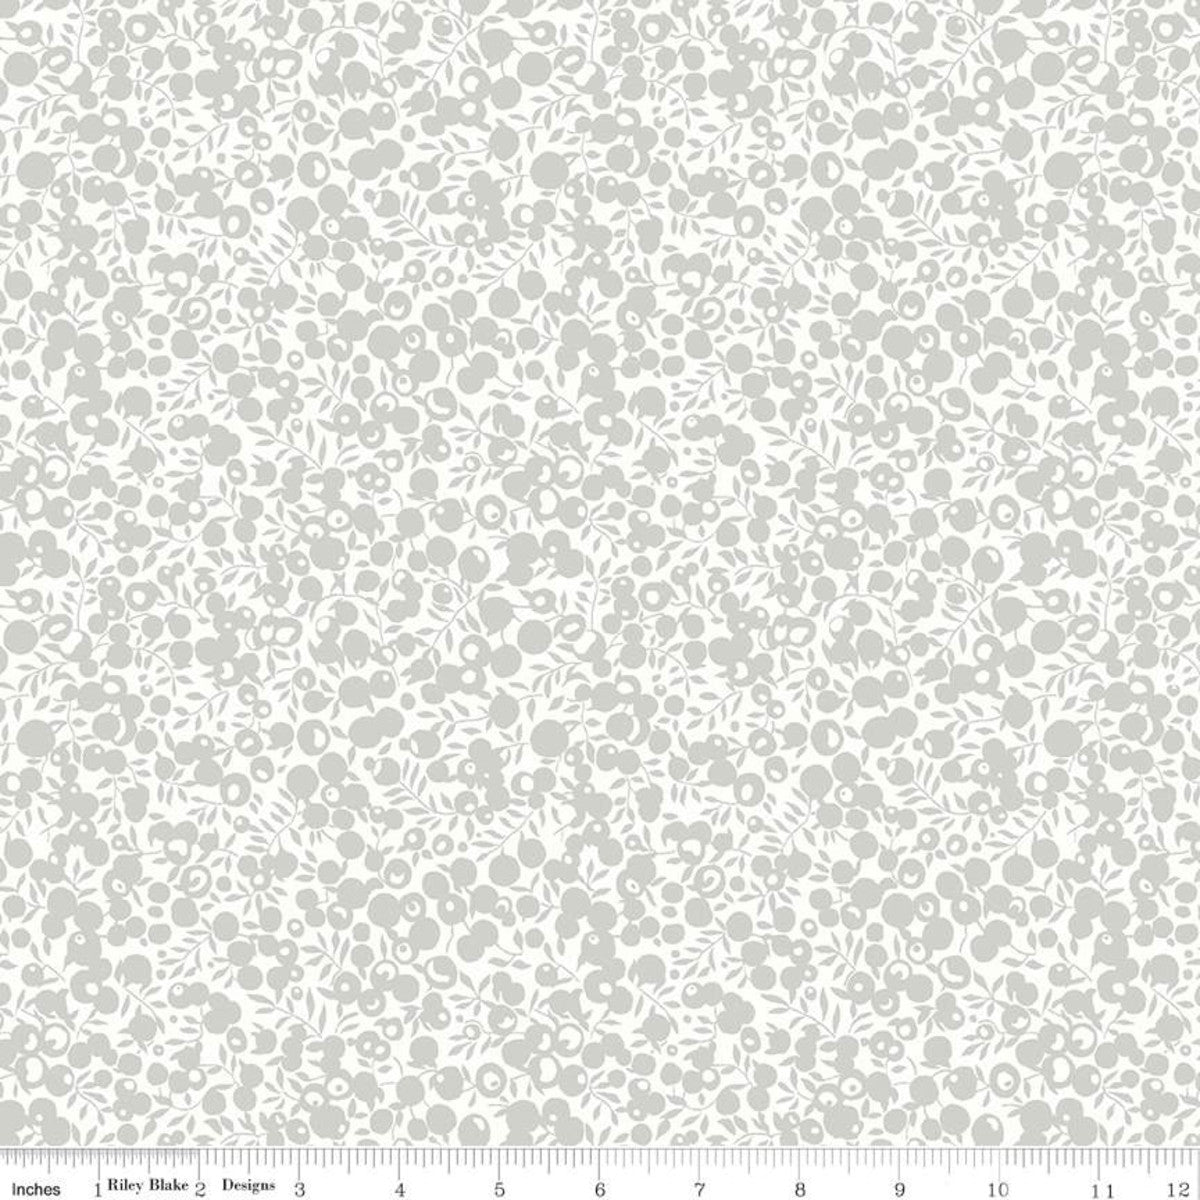 Silver Sparkle - The Wiltshire Shadow Collection - Liberty of London quilting cotton